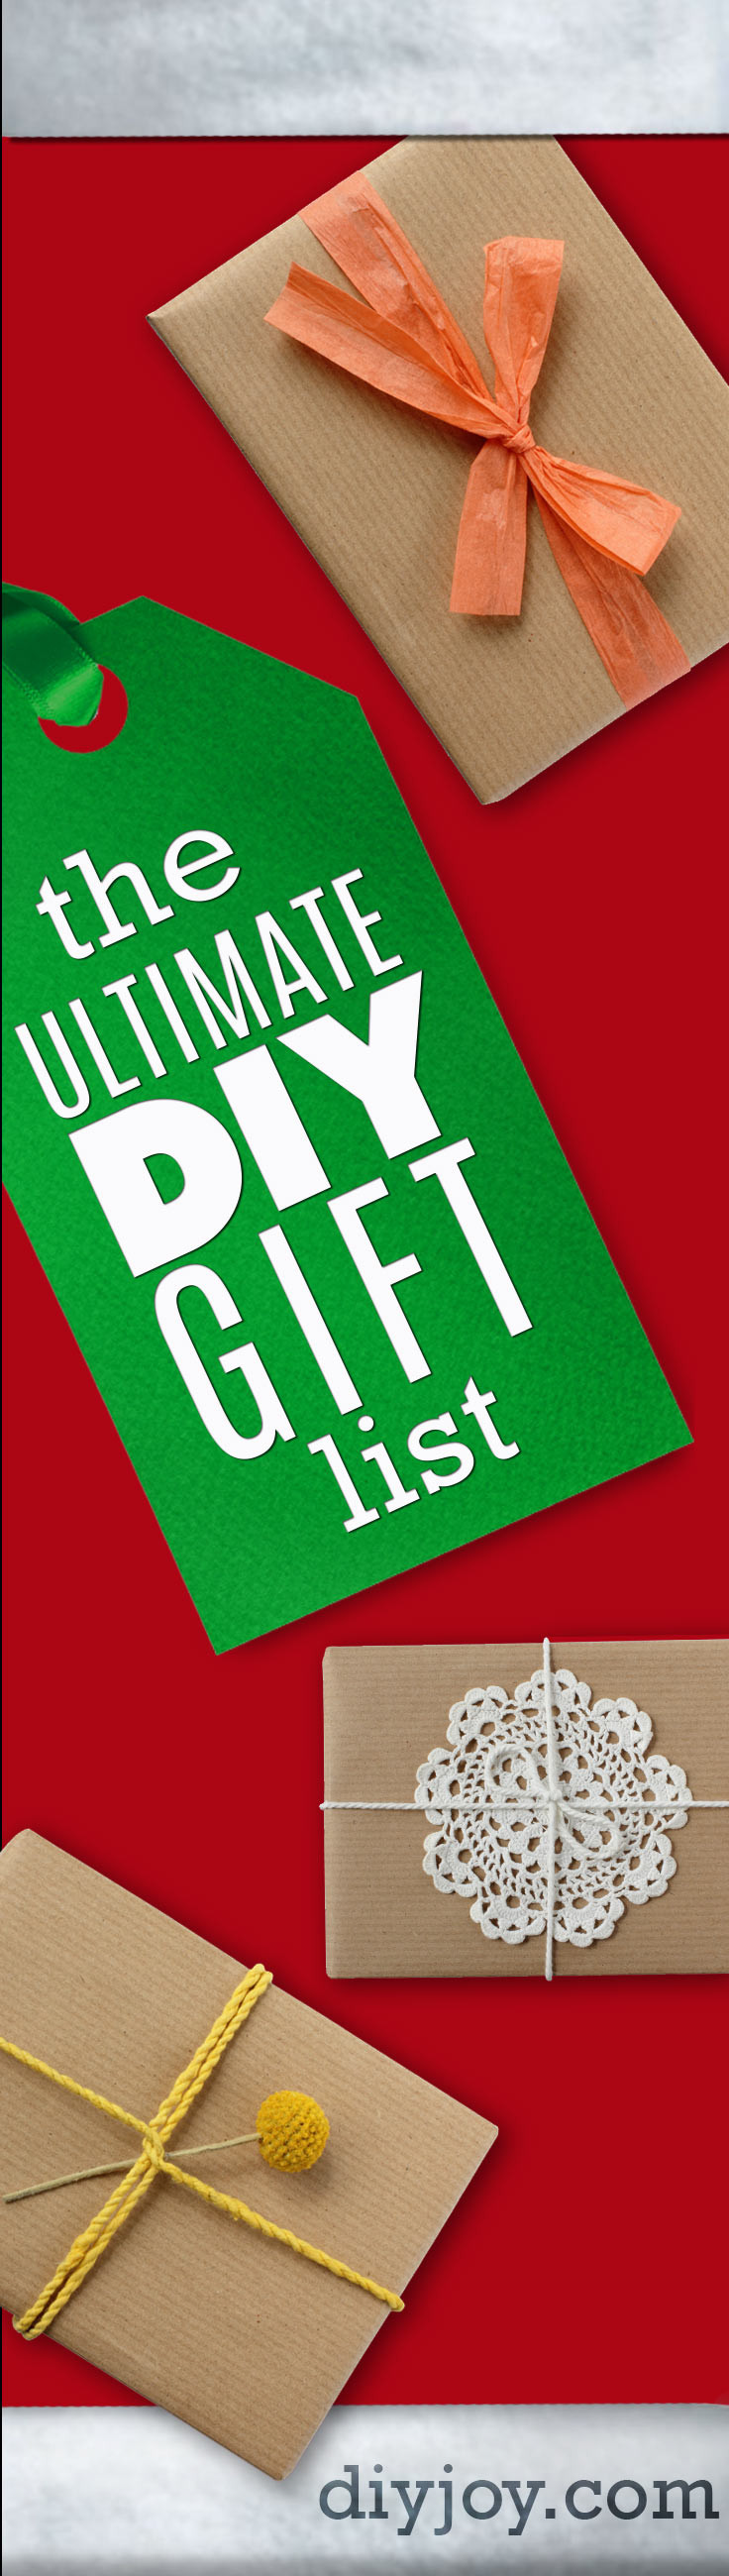 DIY Christmas Gifts For Boyfriend
 The Ultimate DIY Christmas Gifts list